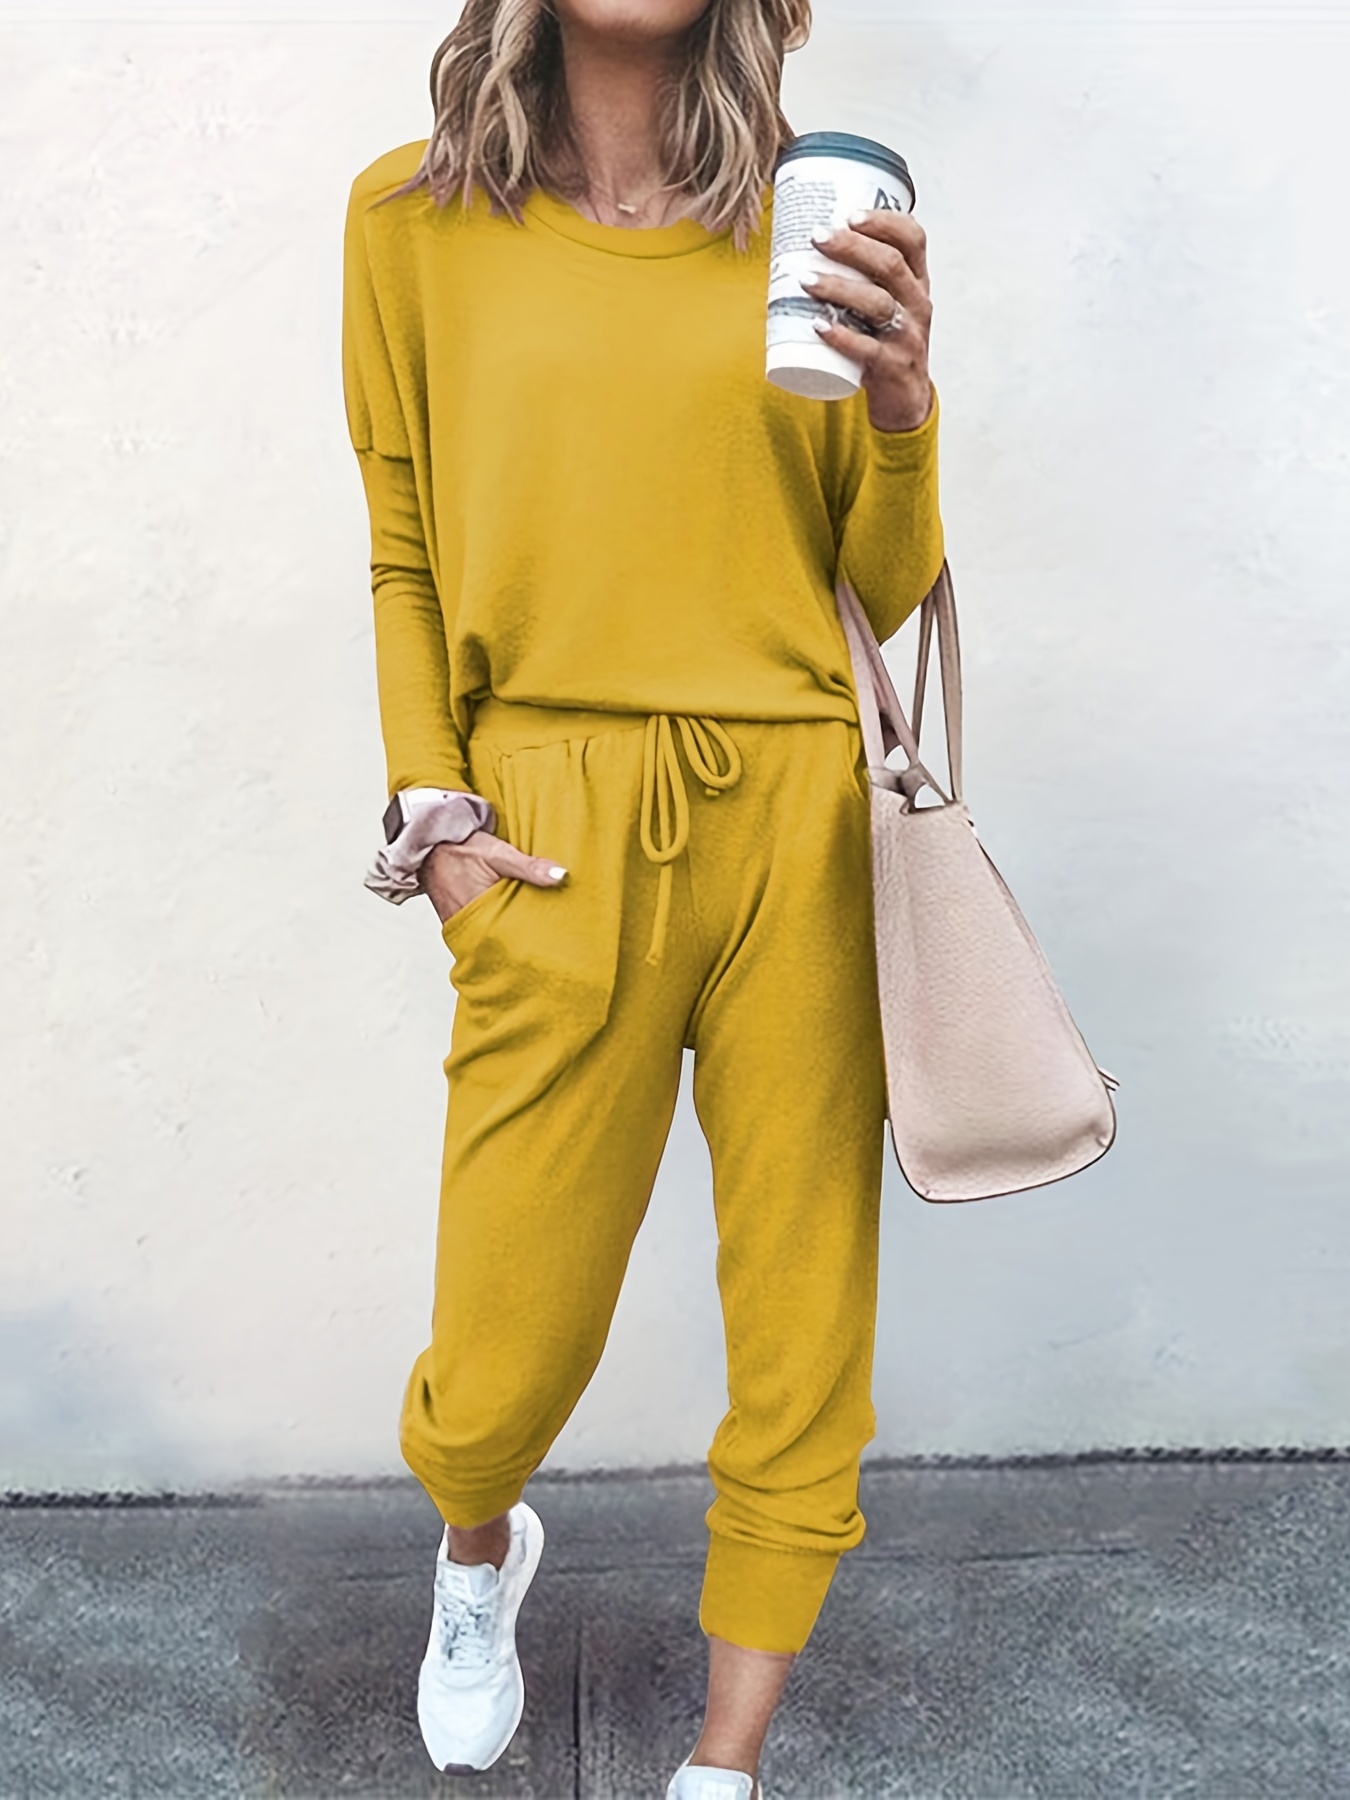 Summer Casual O Neck Knotted Two Piece Set For Women Short Sleeve Crop T  Shirt And Long Plain Pants From Amoy2021, $20.21